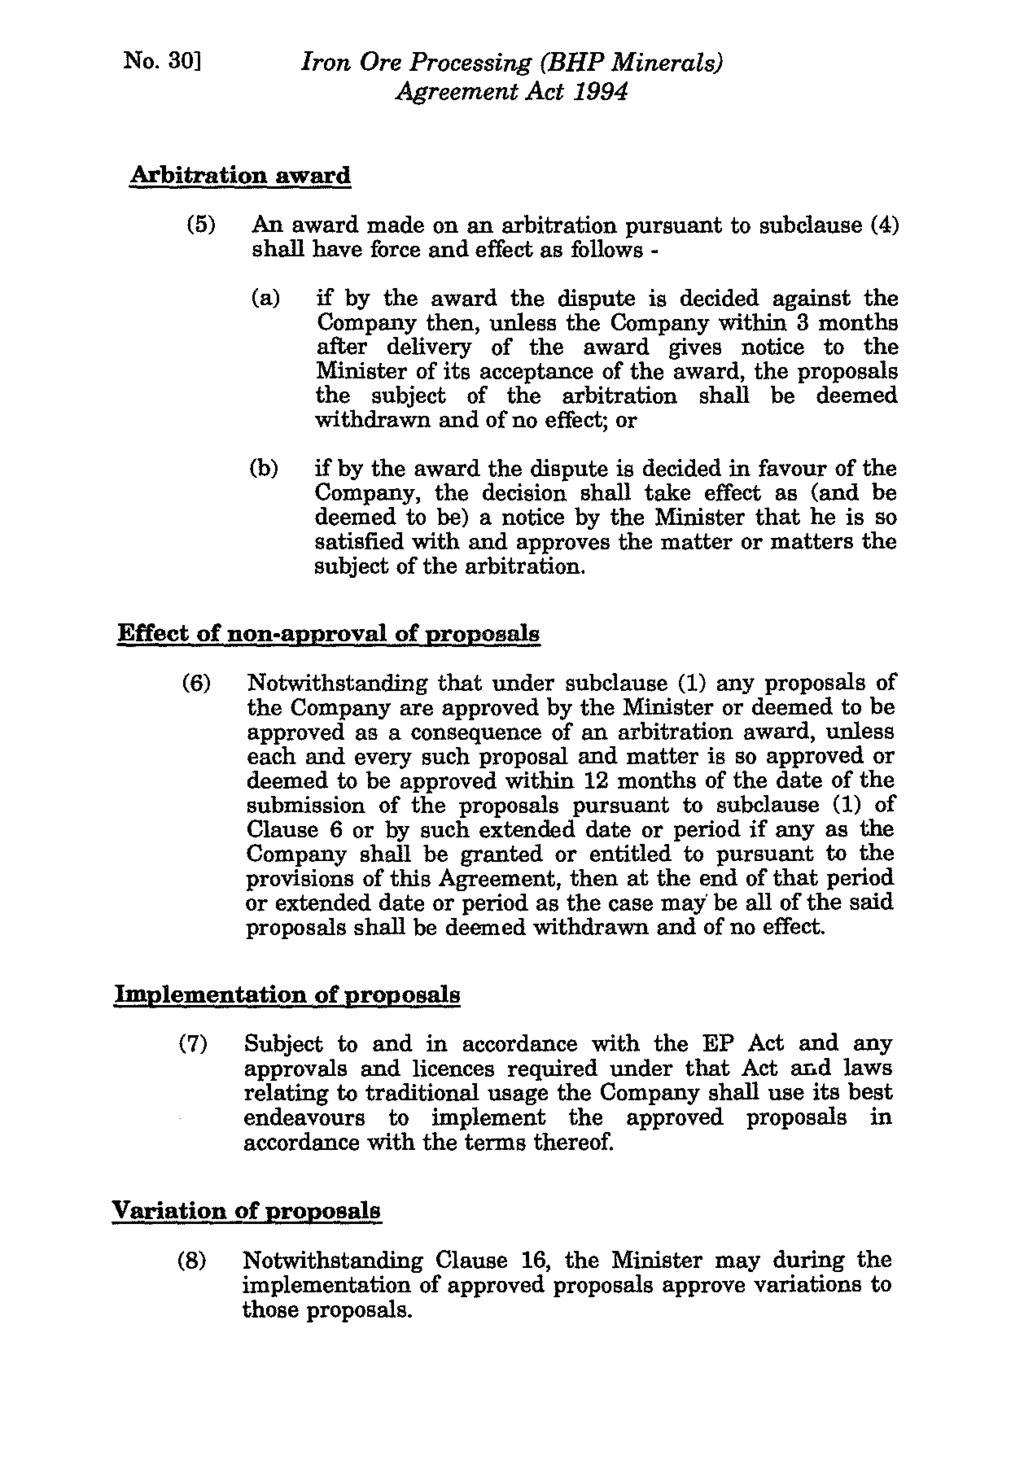 No. 301 Iron Ore Processing (BHP Minerals) Arbitration award (5) An award made on an arbitration pursuant to subclause (4) shall have force and effect as follows - (a) (b) if by the award the dispute